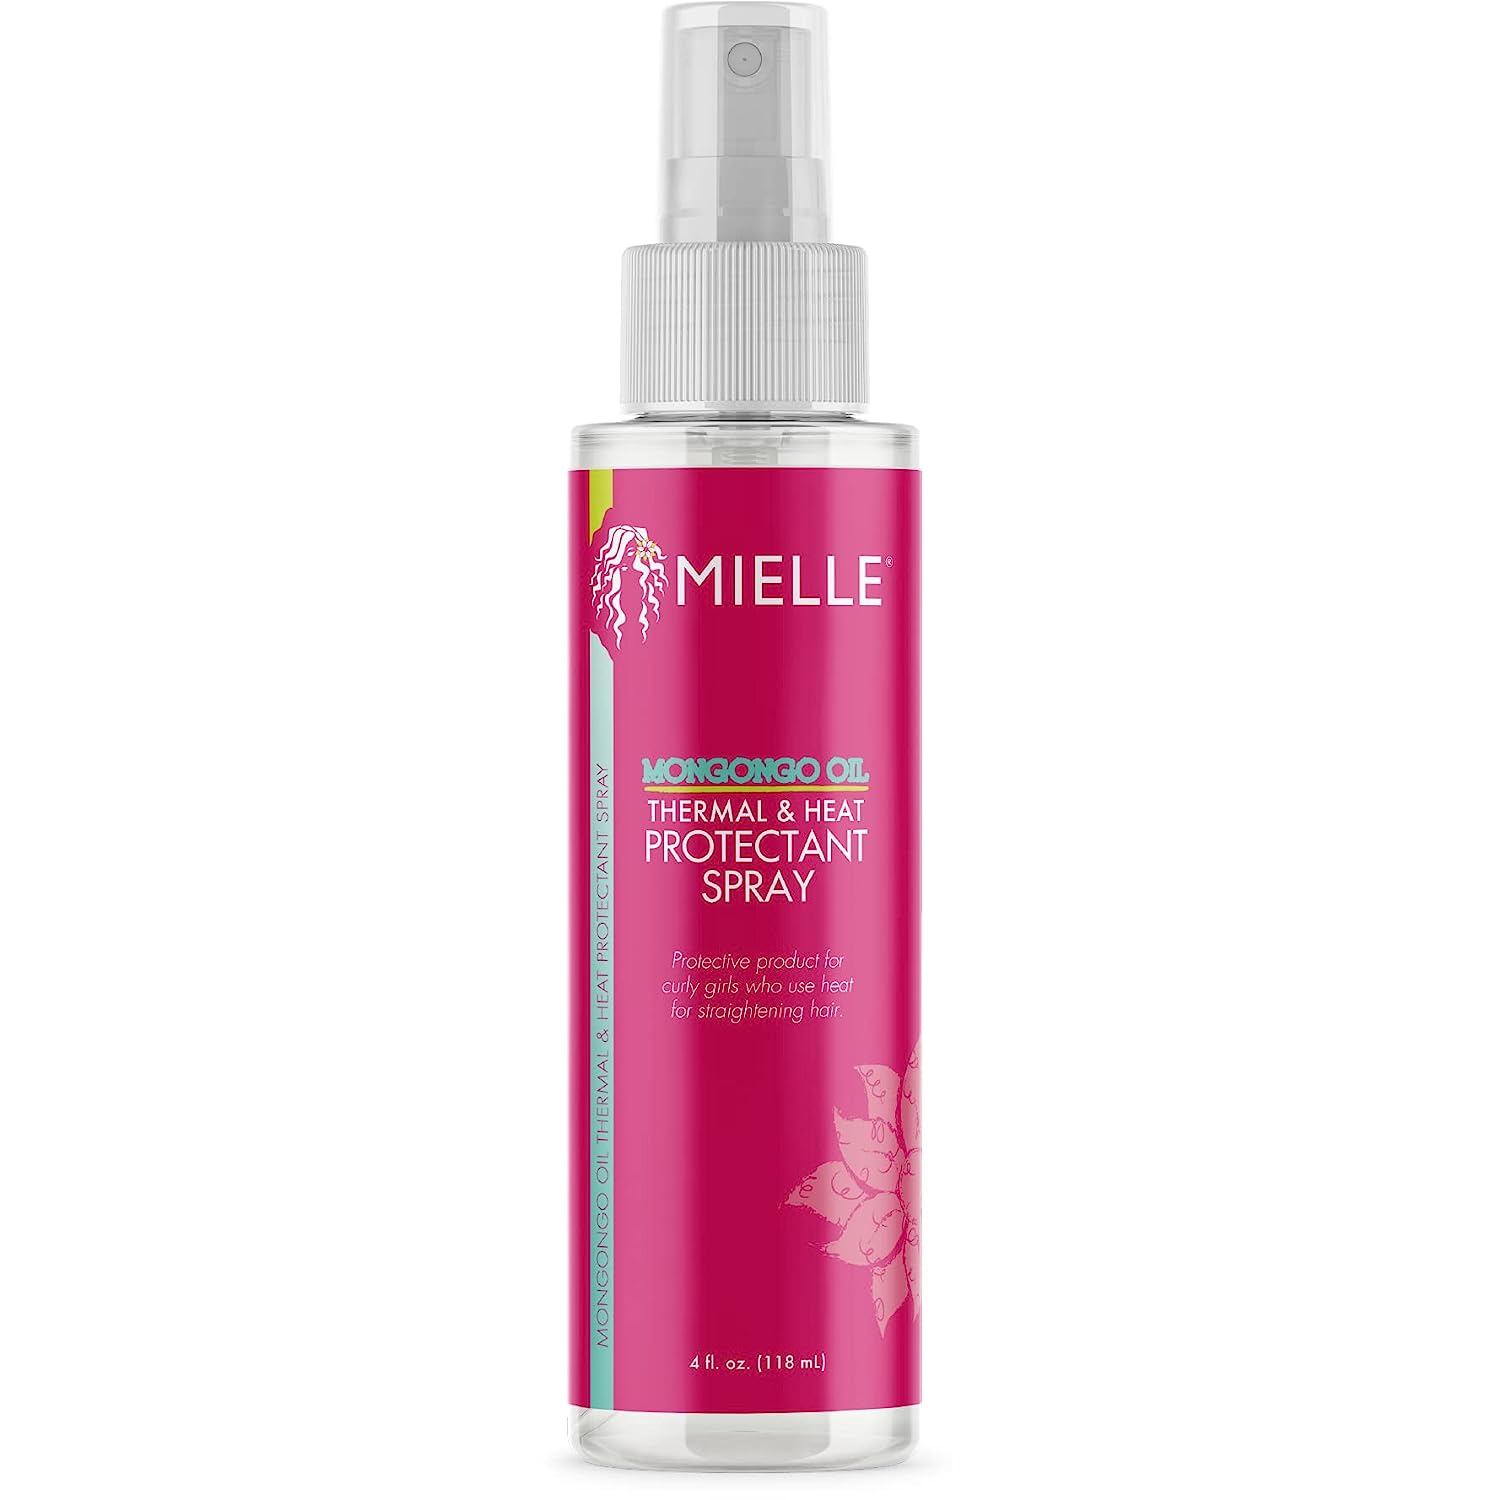 Mielle Organics Mongongo Oil Thermal & Heat Protectant [...]